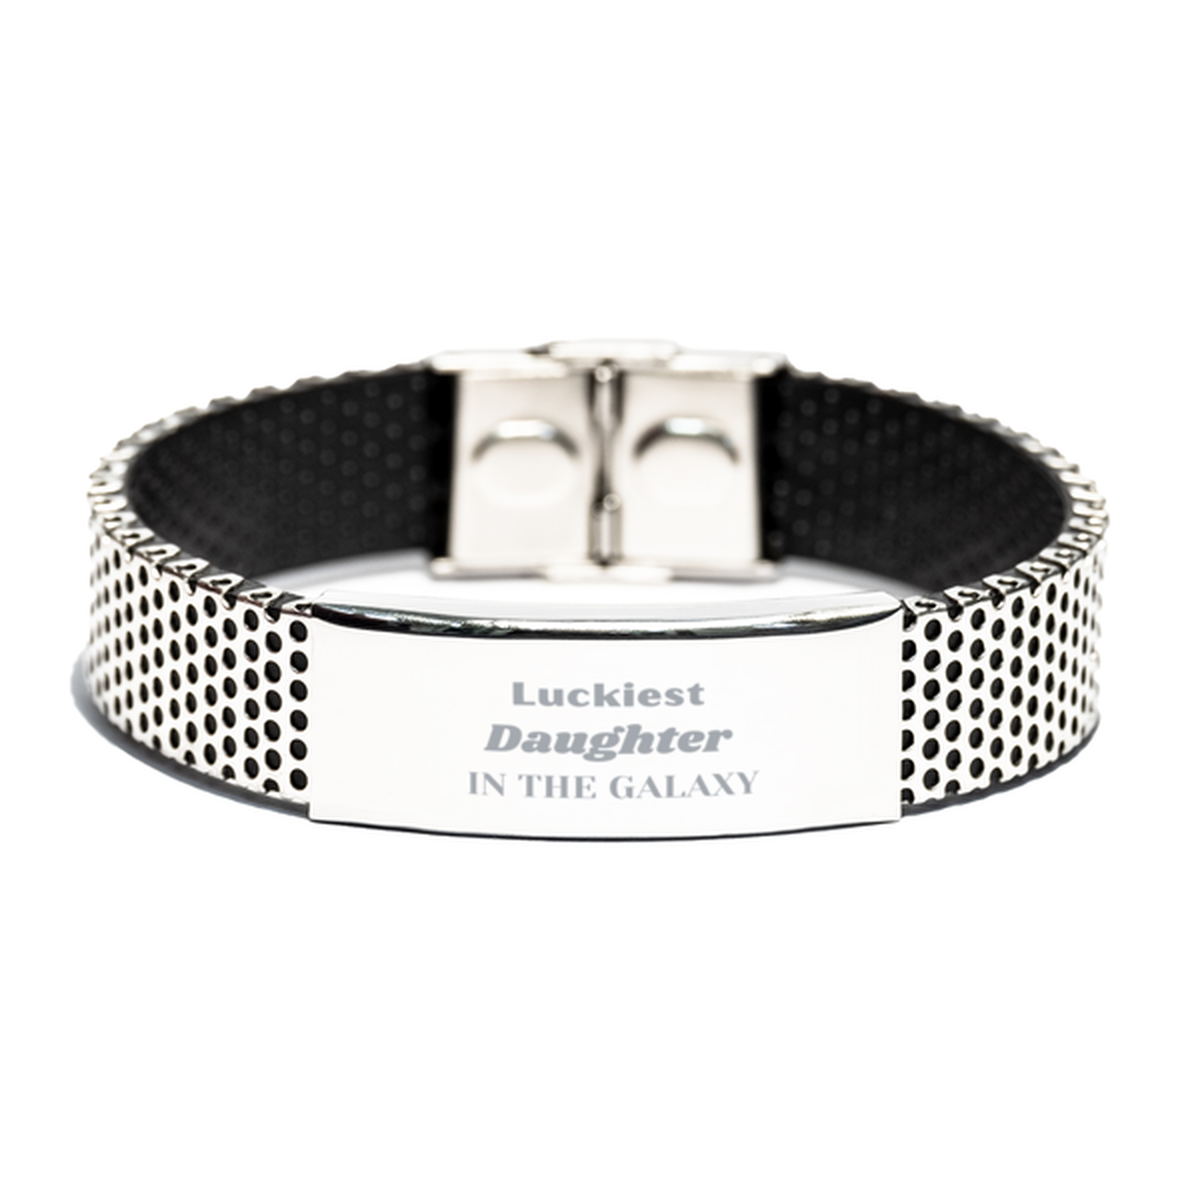 Luckiest Daughter in the Galaxy, To My Daughter Engraved Gifts, Christmas Daughter Stainless Steel Bracelet Gifts, X-mas Birthday Unique Gifts For Daughter Men Women